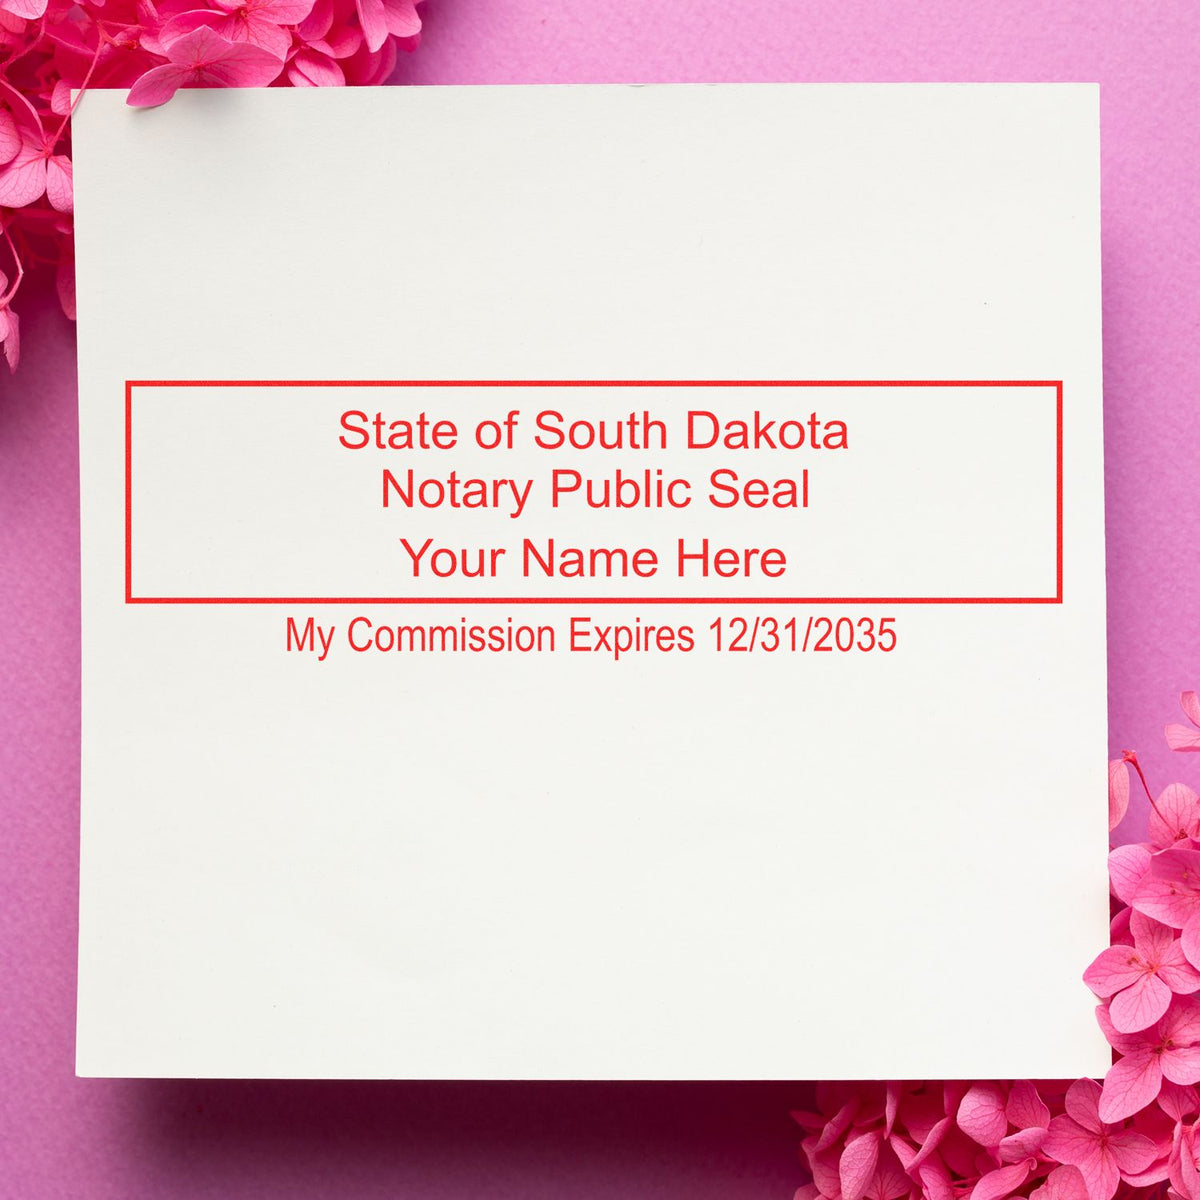 A stamped impression of the Wooden Handle South Dakota Rectangular Notary Public Stamp in this stylish lifestyle photo, setting the tone for a unique and personalized product.